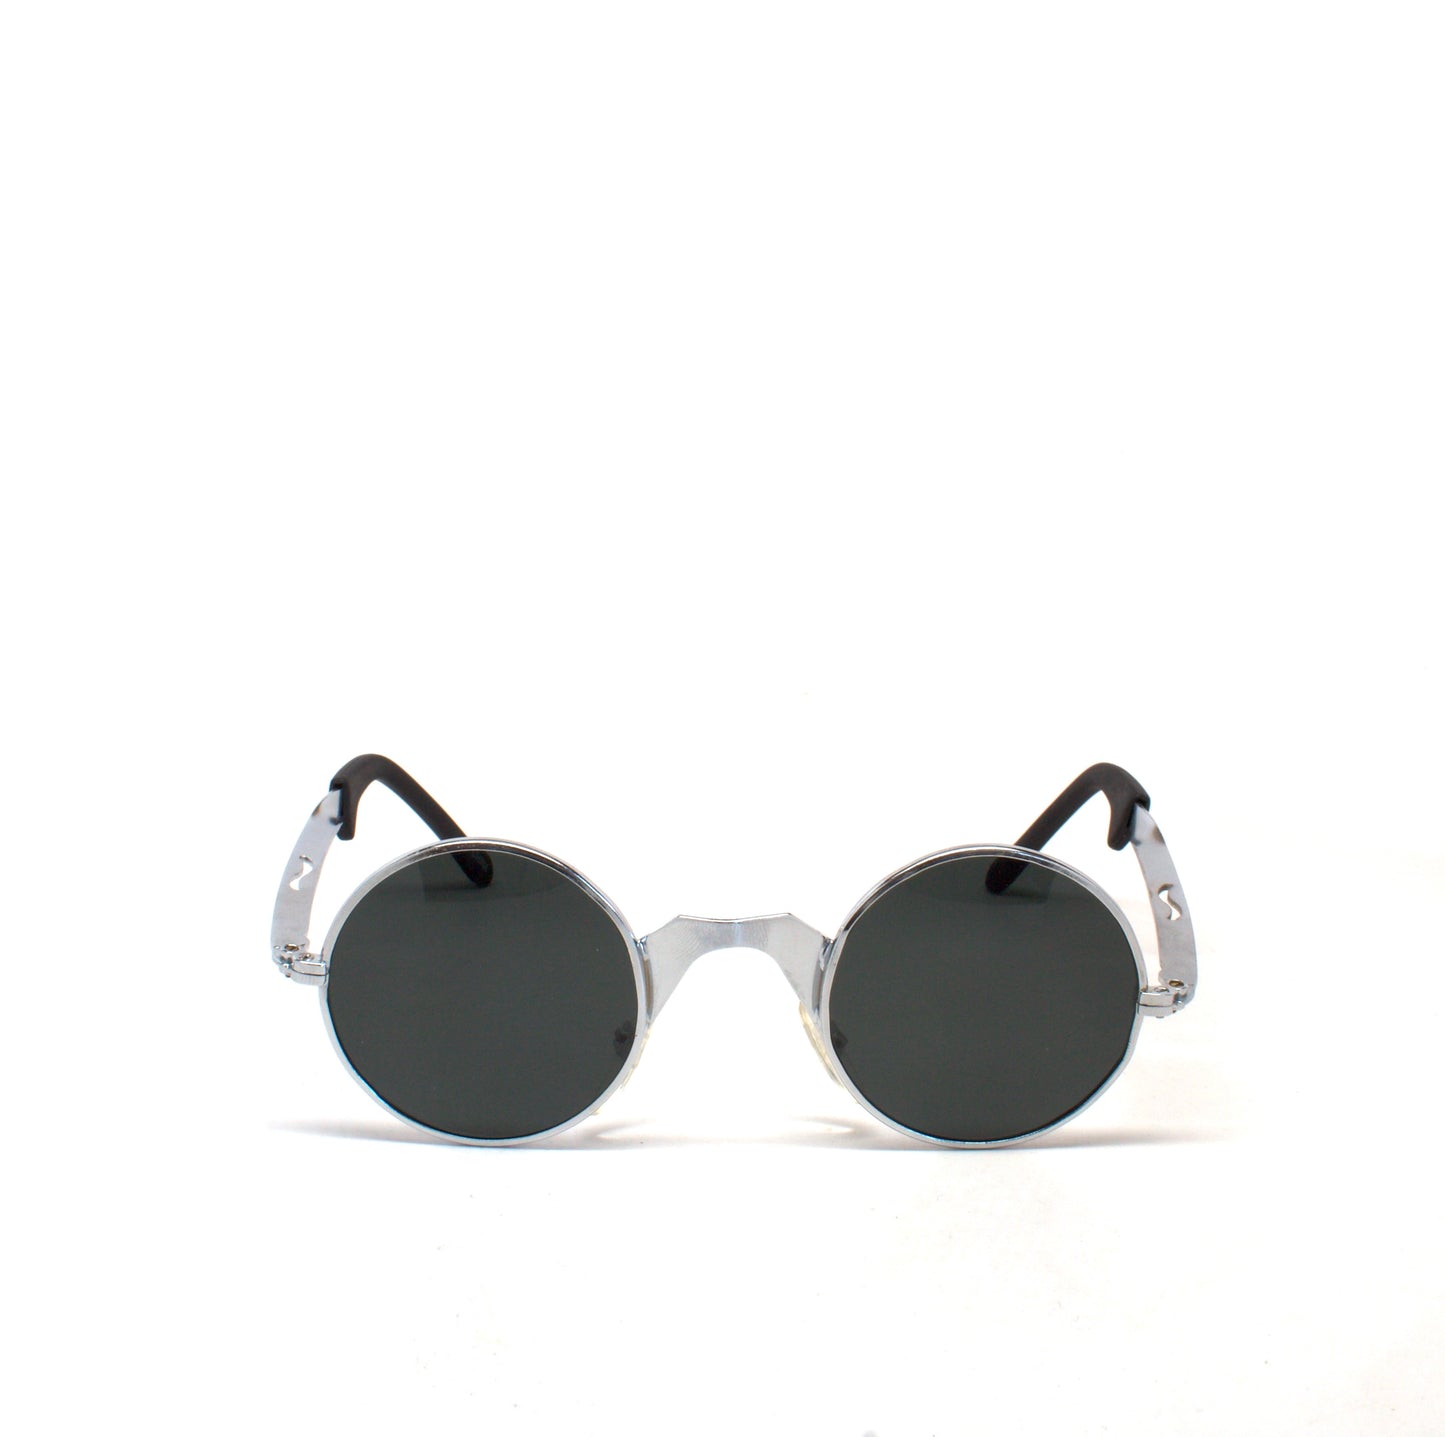 Vintage Small Size 1997 Deadstock Grunge Small Circle Frame Sunglasses - Silver